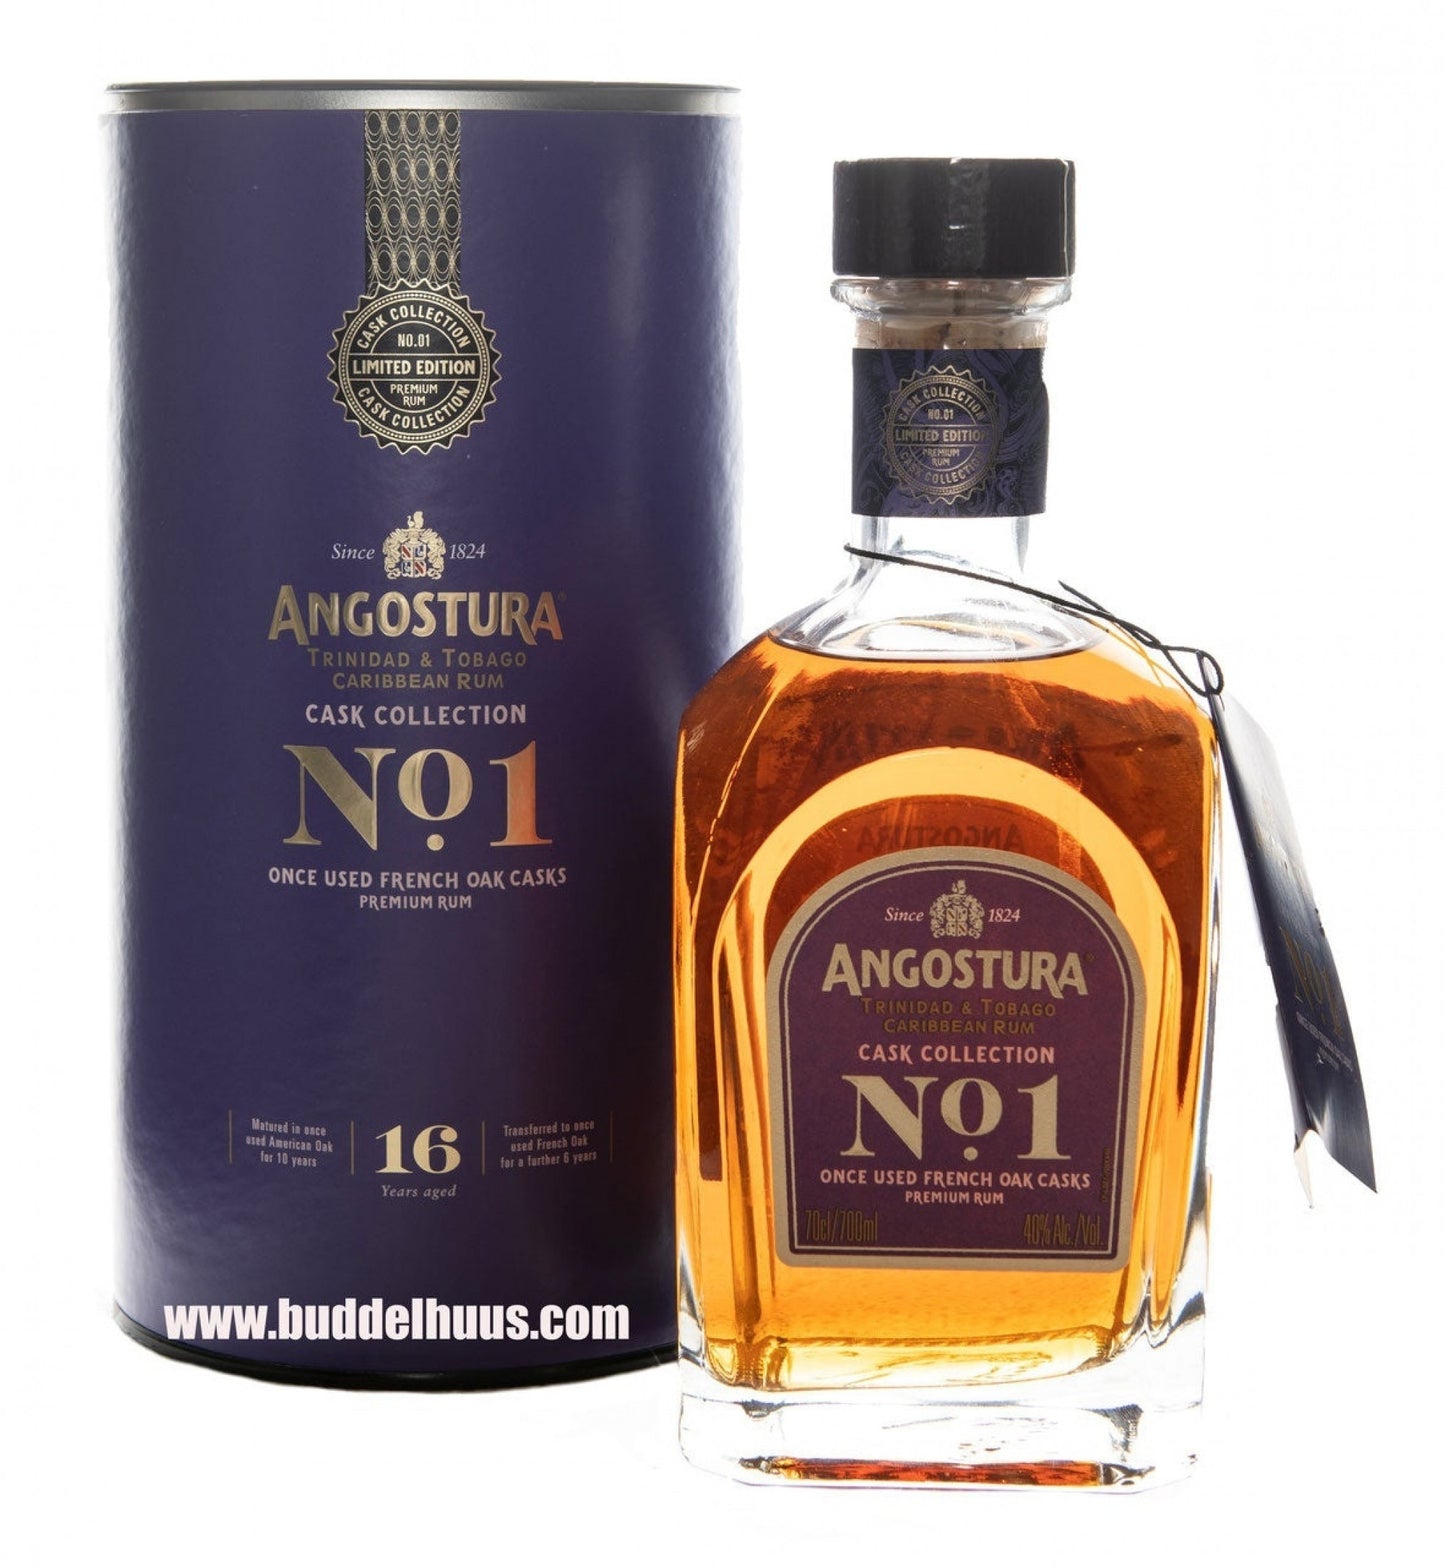 Angostura 16 yo Cask Collection No 1 2nd Release